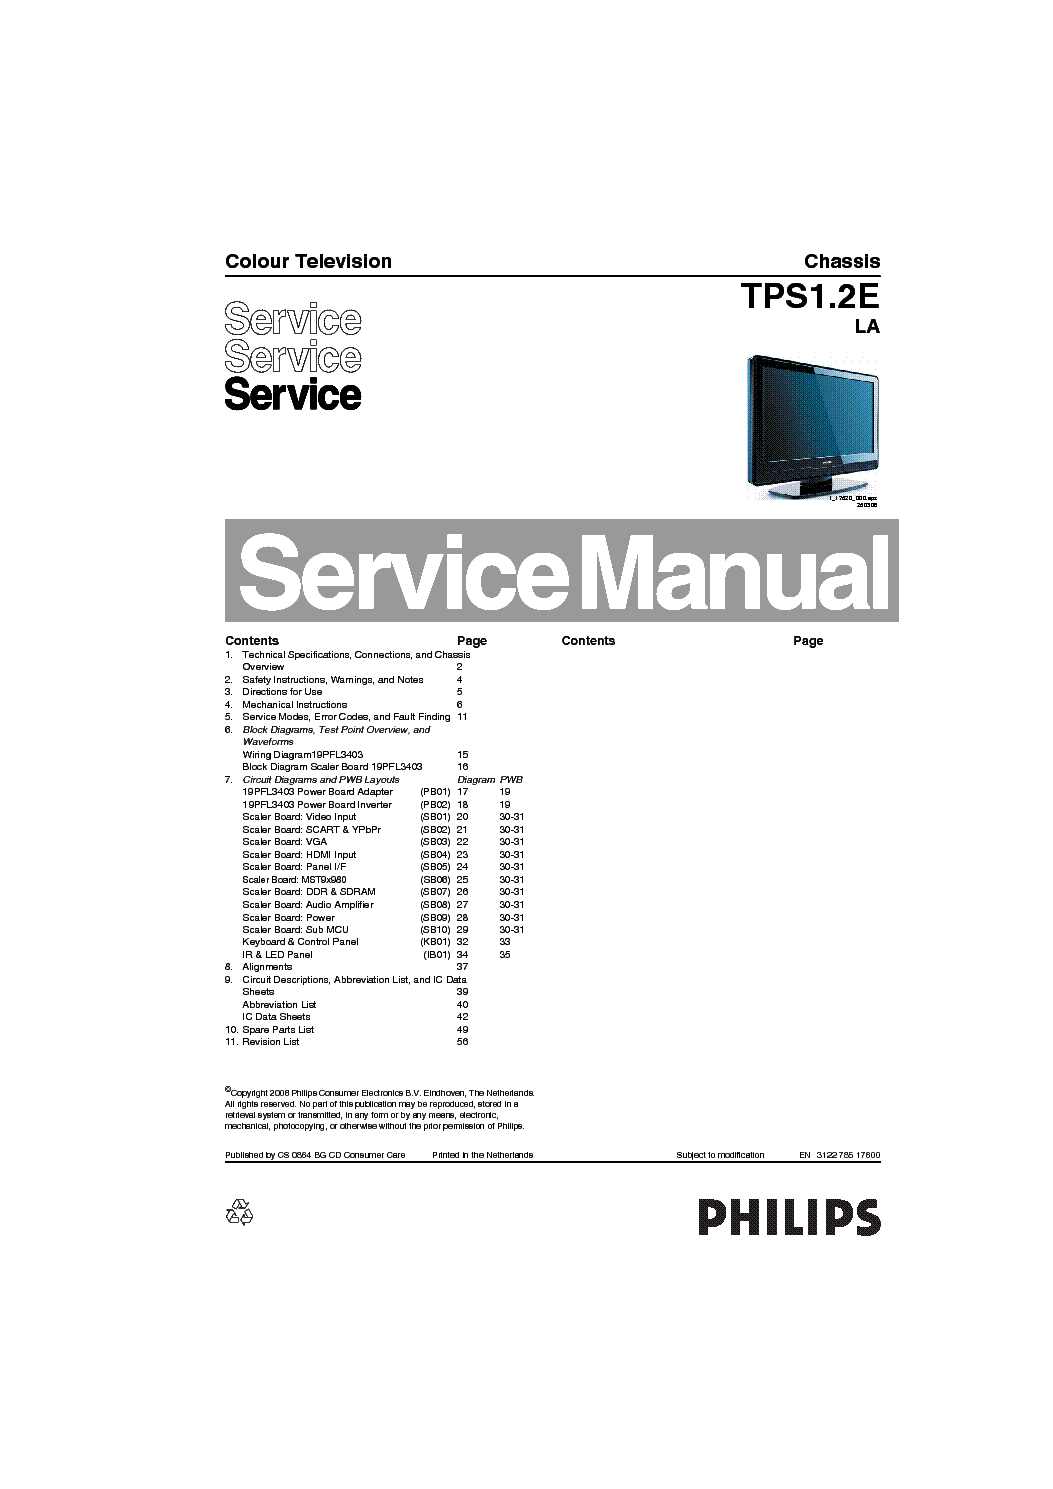 PHILIPS TPS1.2ELA 312278517600 service manual (1st page)